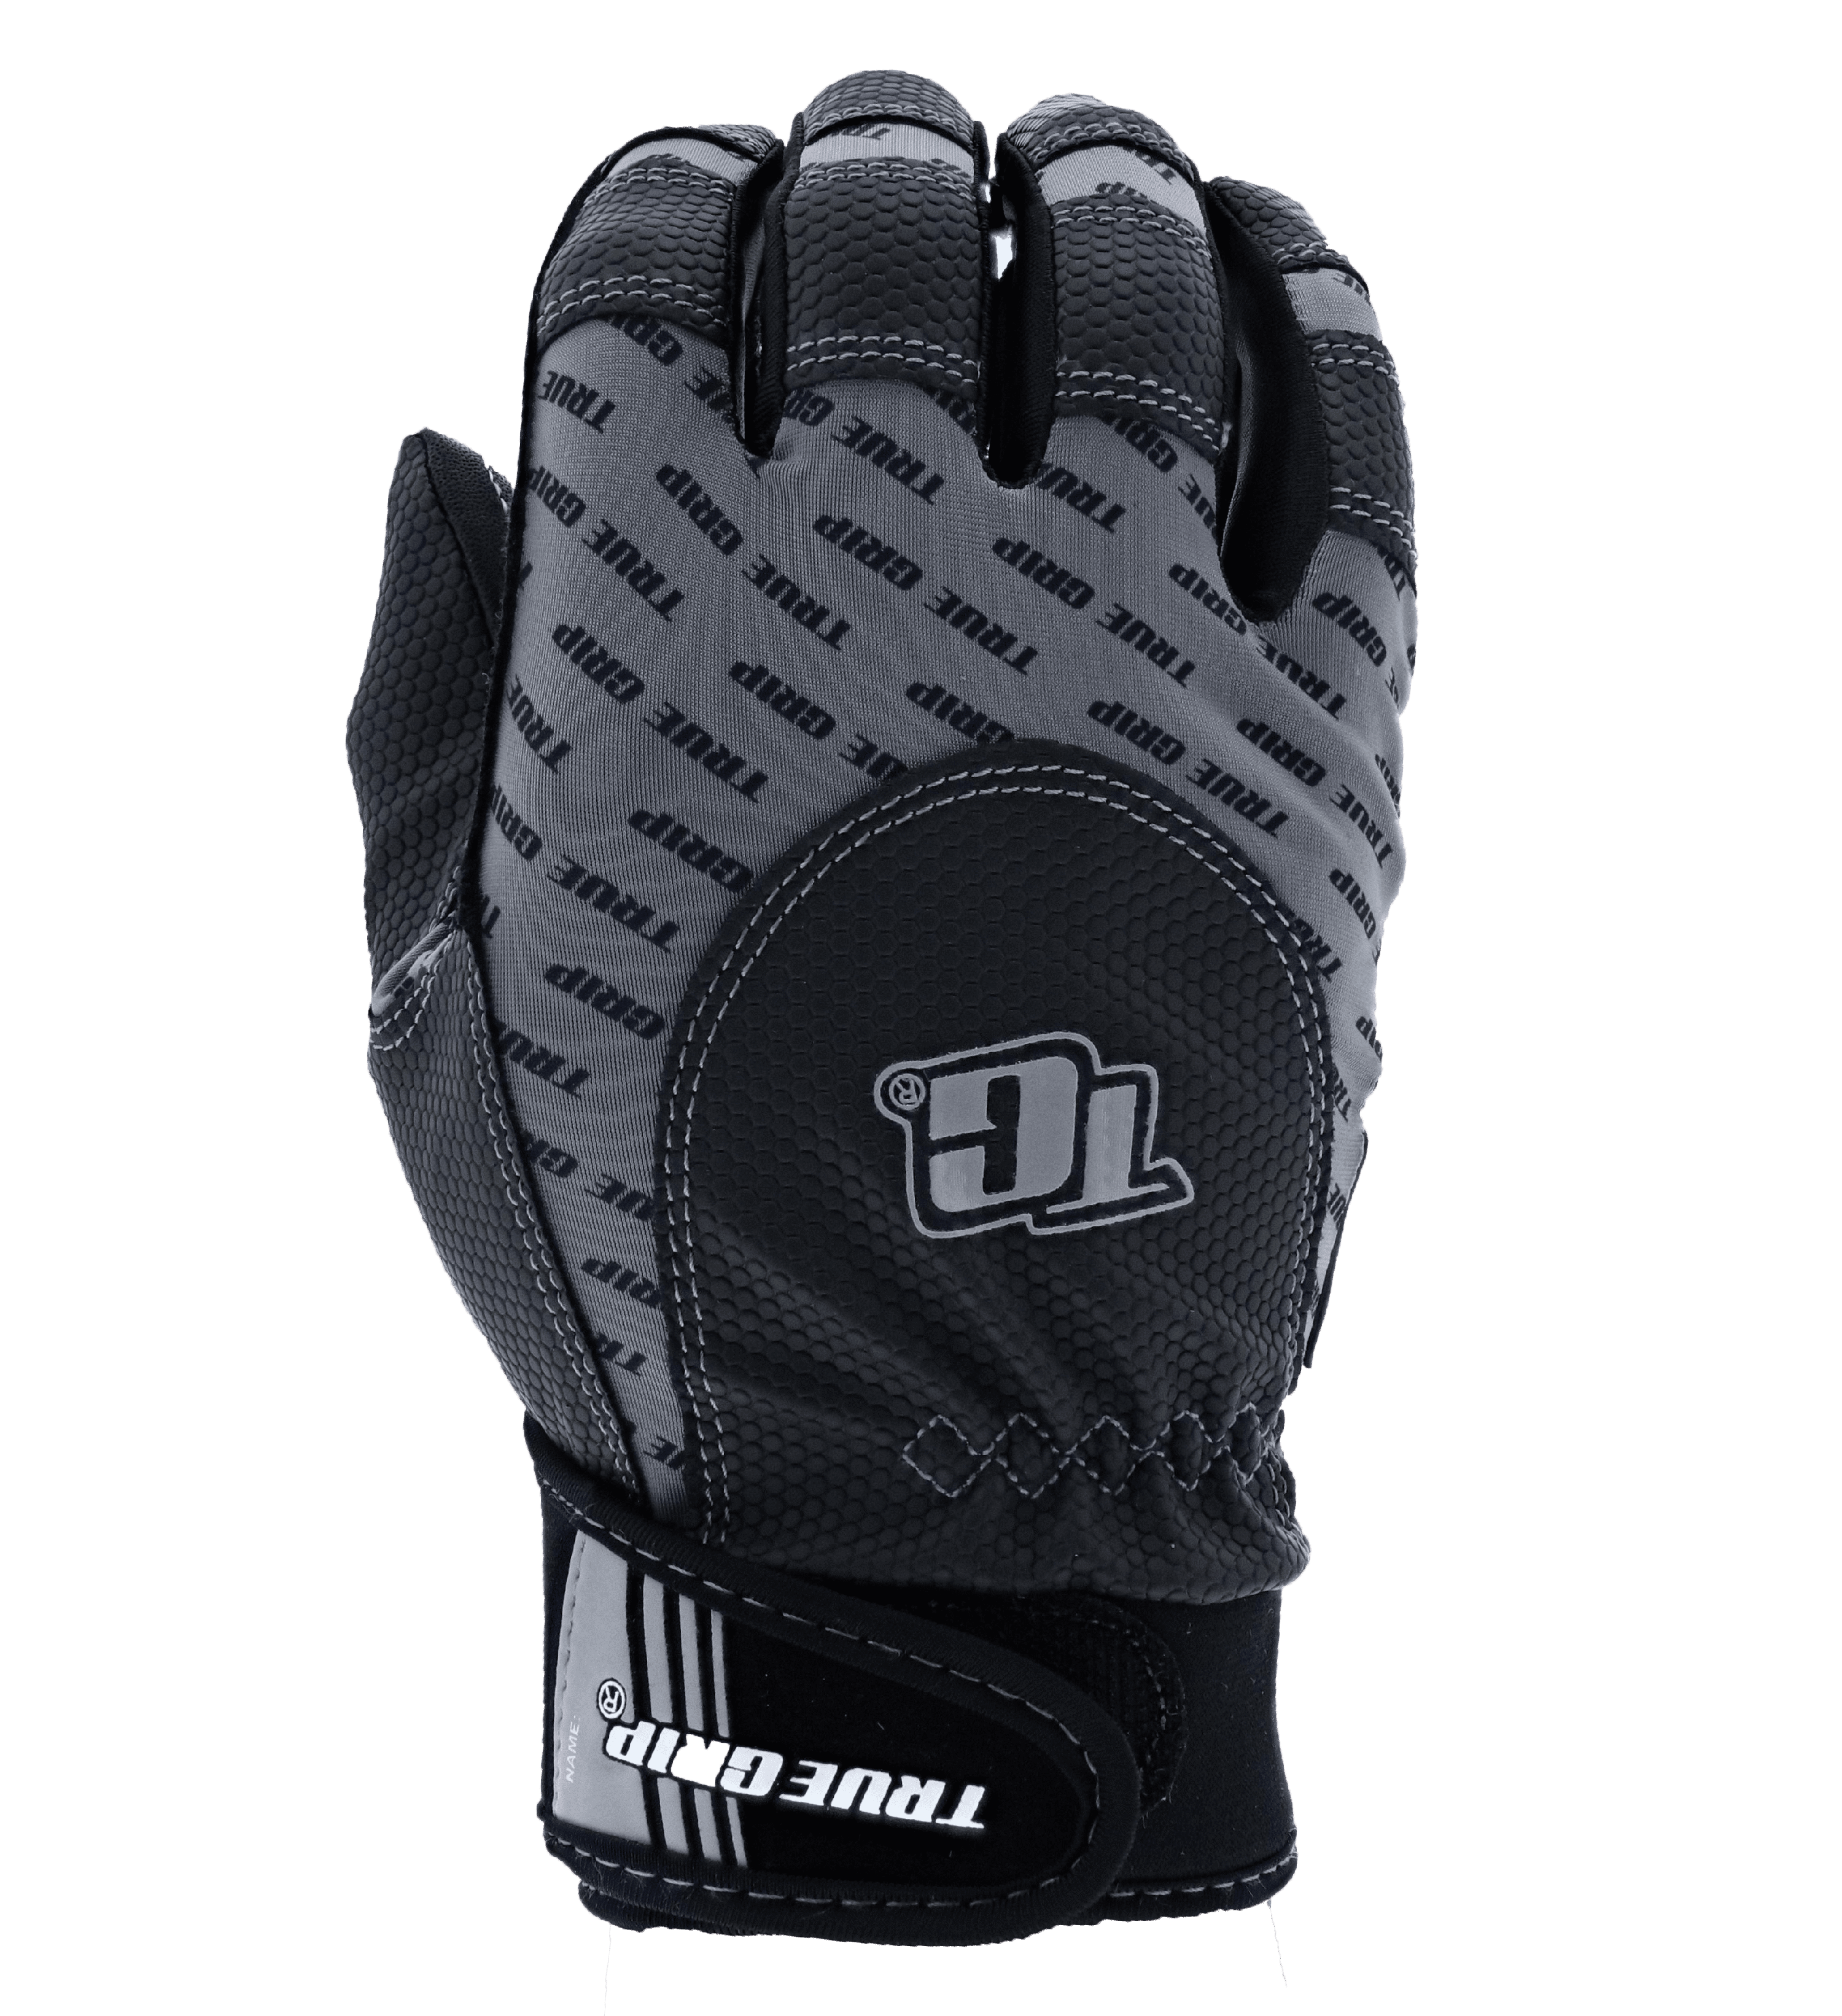 True Grip Safety Max Work Gloves With Touchscreen Fingers –